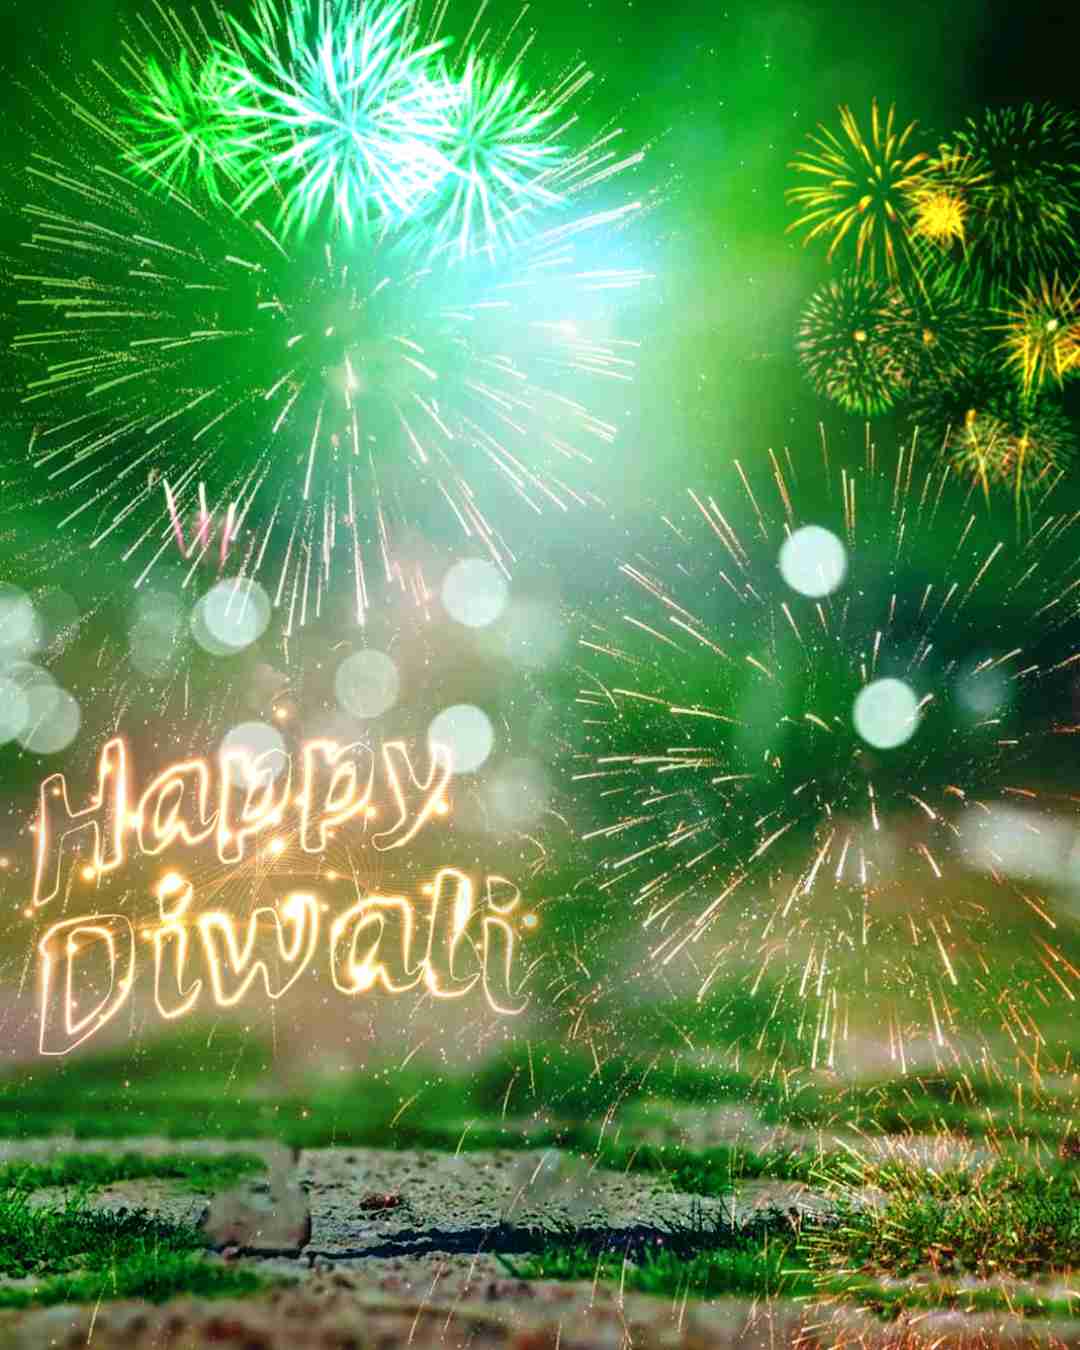 Diwali background for editing download full HD